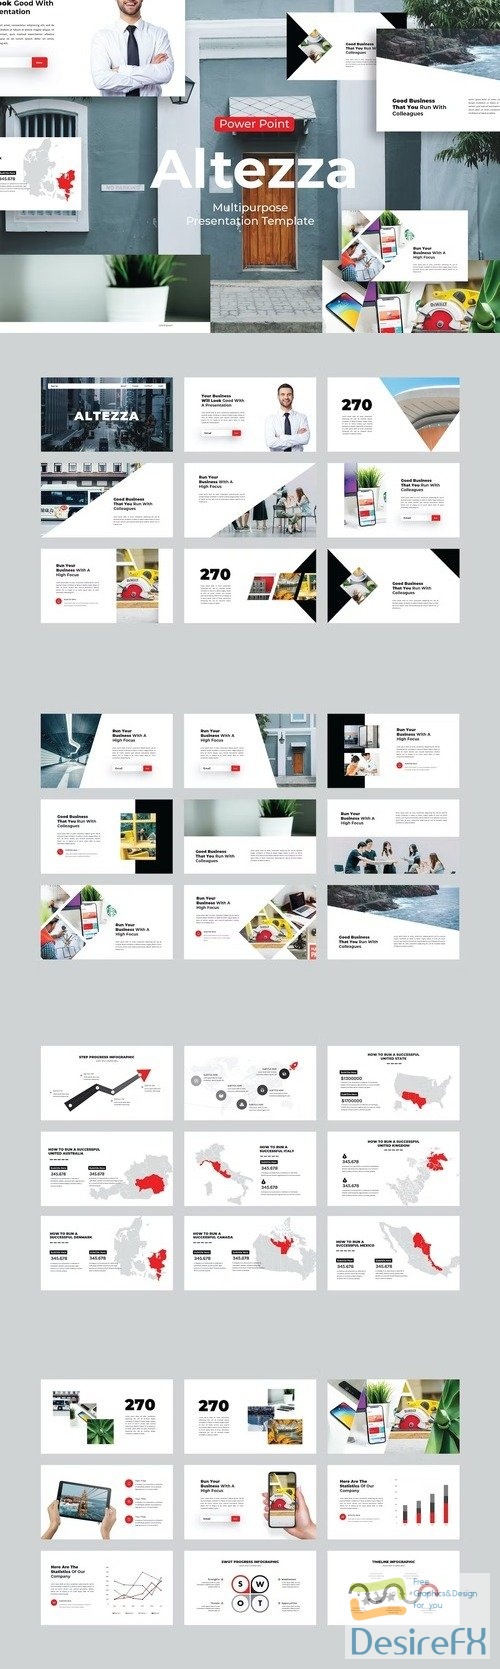 Altezza - PowerPoint Template